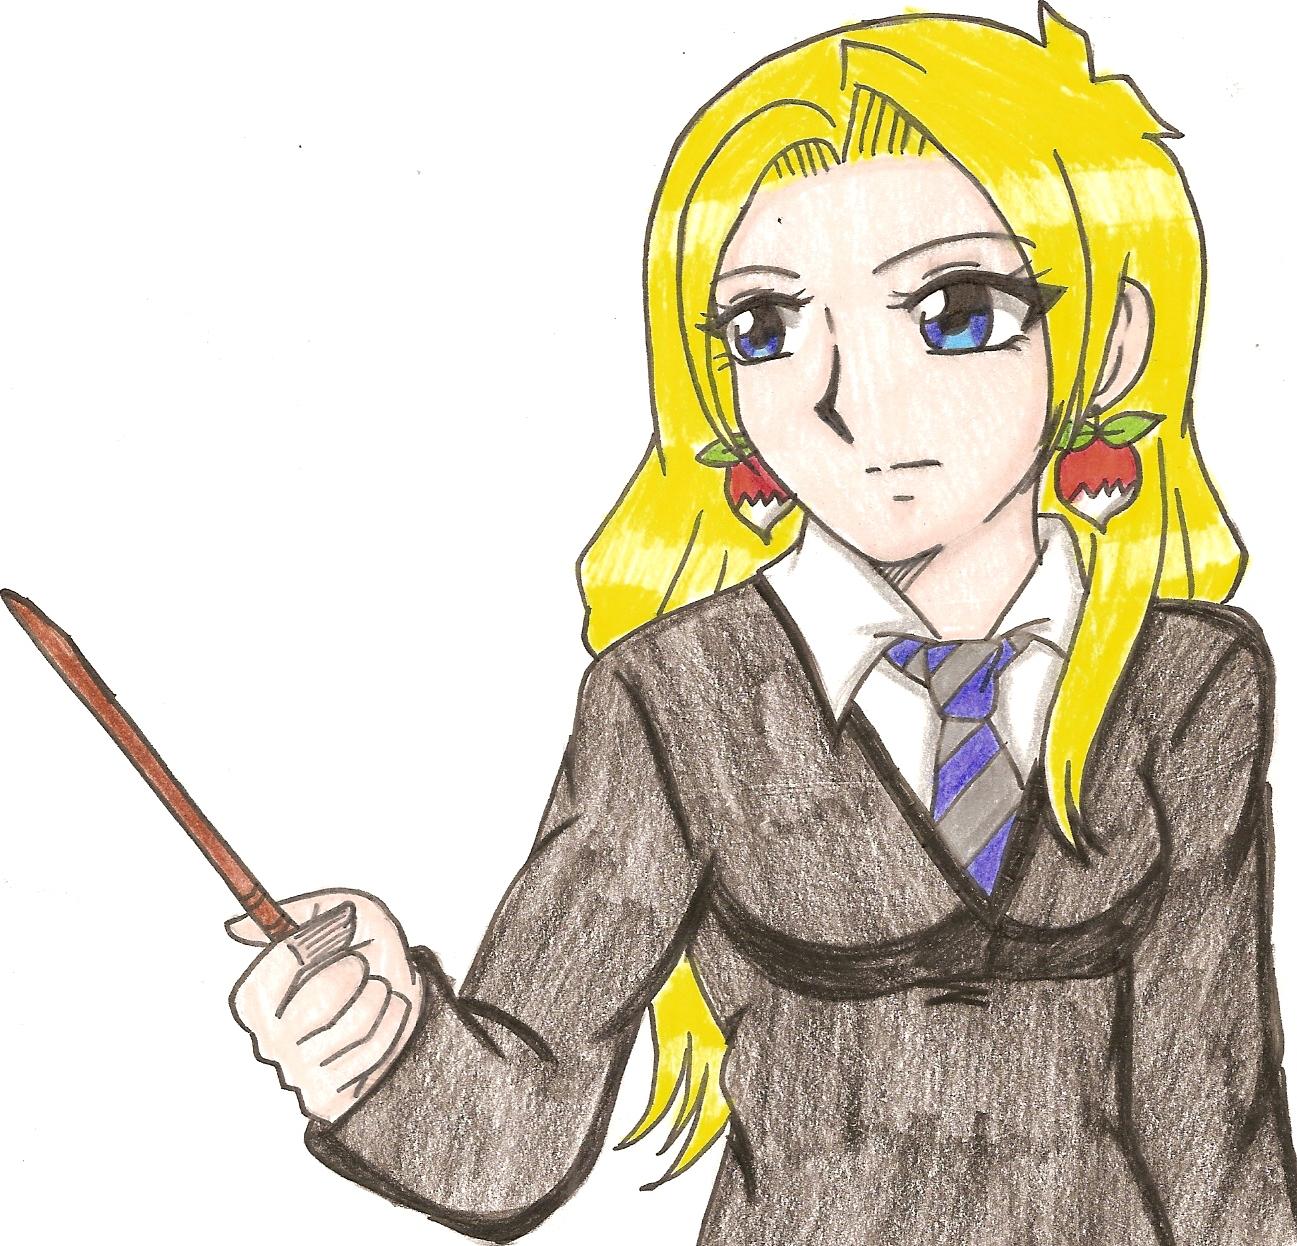 Another Luna Lovegood piccy by kittysan5